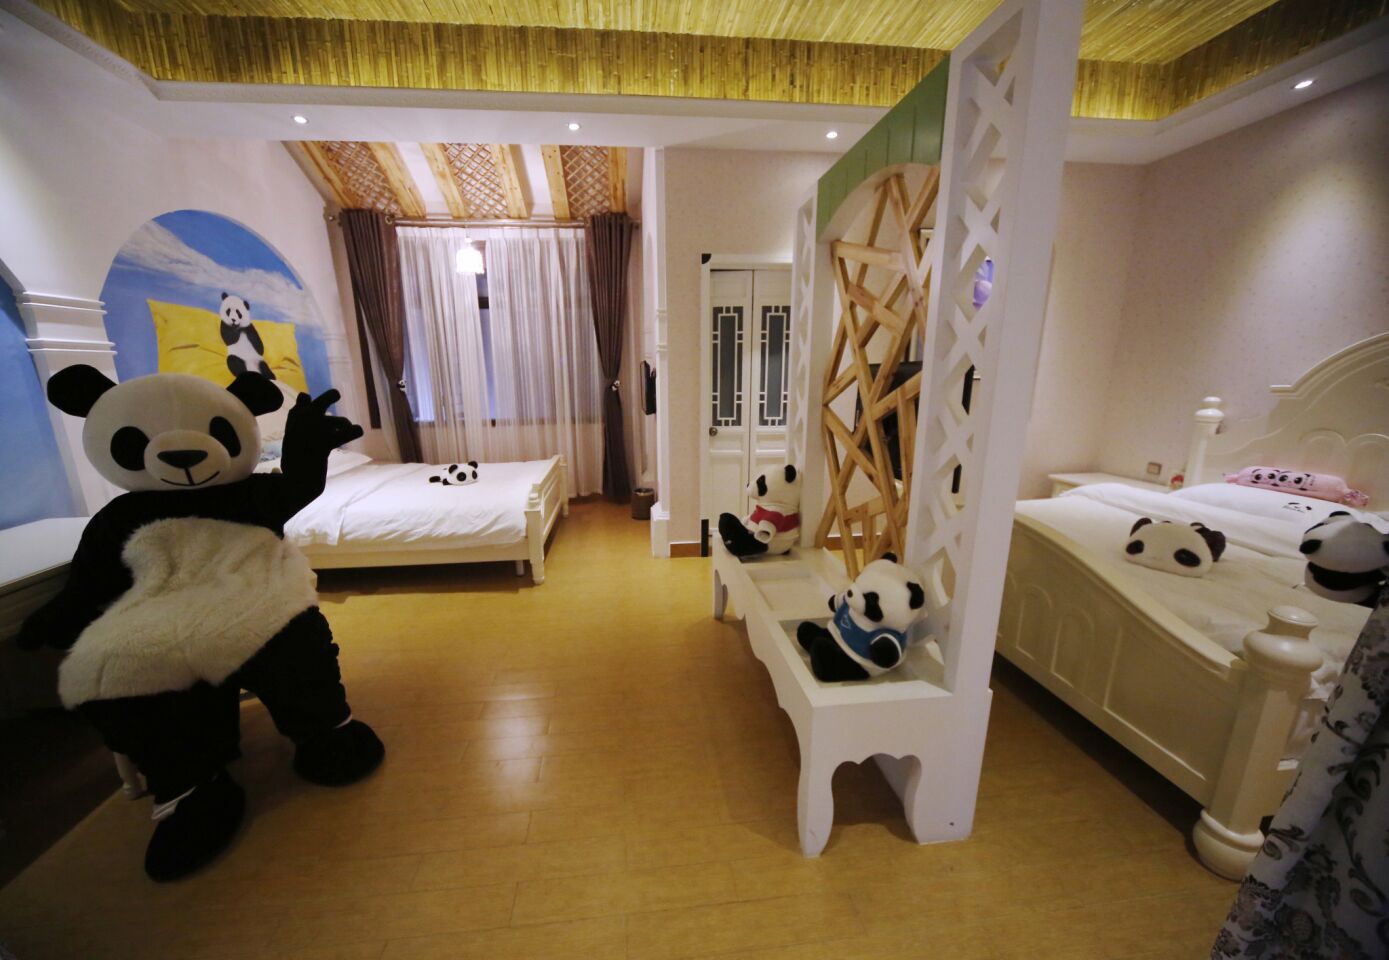 Panda lovers of the world now have another place to call home (for a few nights, at least). In 2013, the Panda Inn, a panda-themed hotel in China's Sichuan province, opened its doors to guests. The 32-room hotel is decorated with panda art, panda furniture and panda-shaped stuffed animals. Even staff members dress in panda suits. More photos...